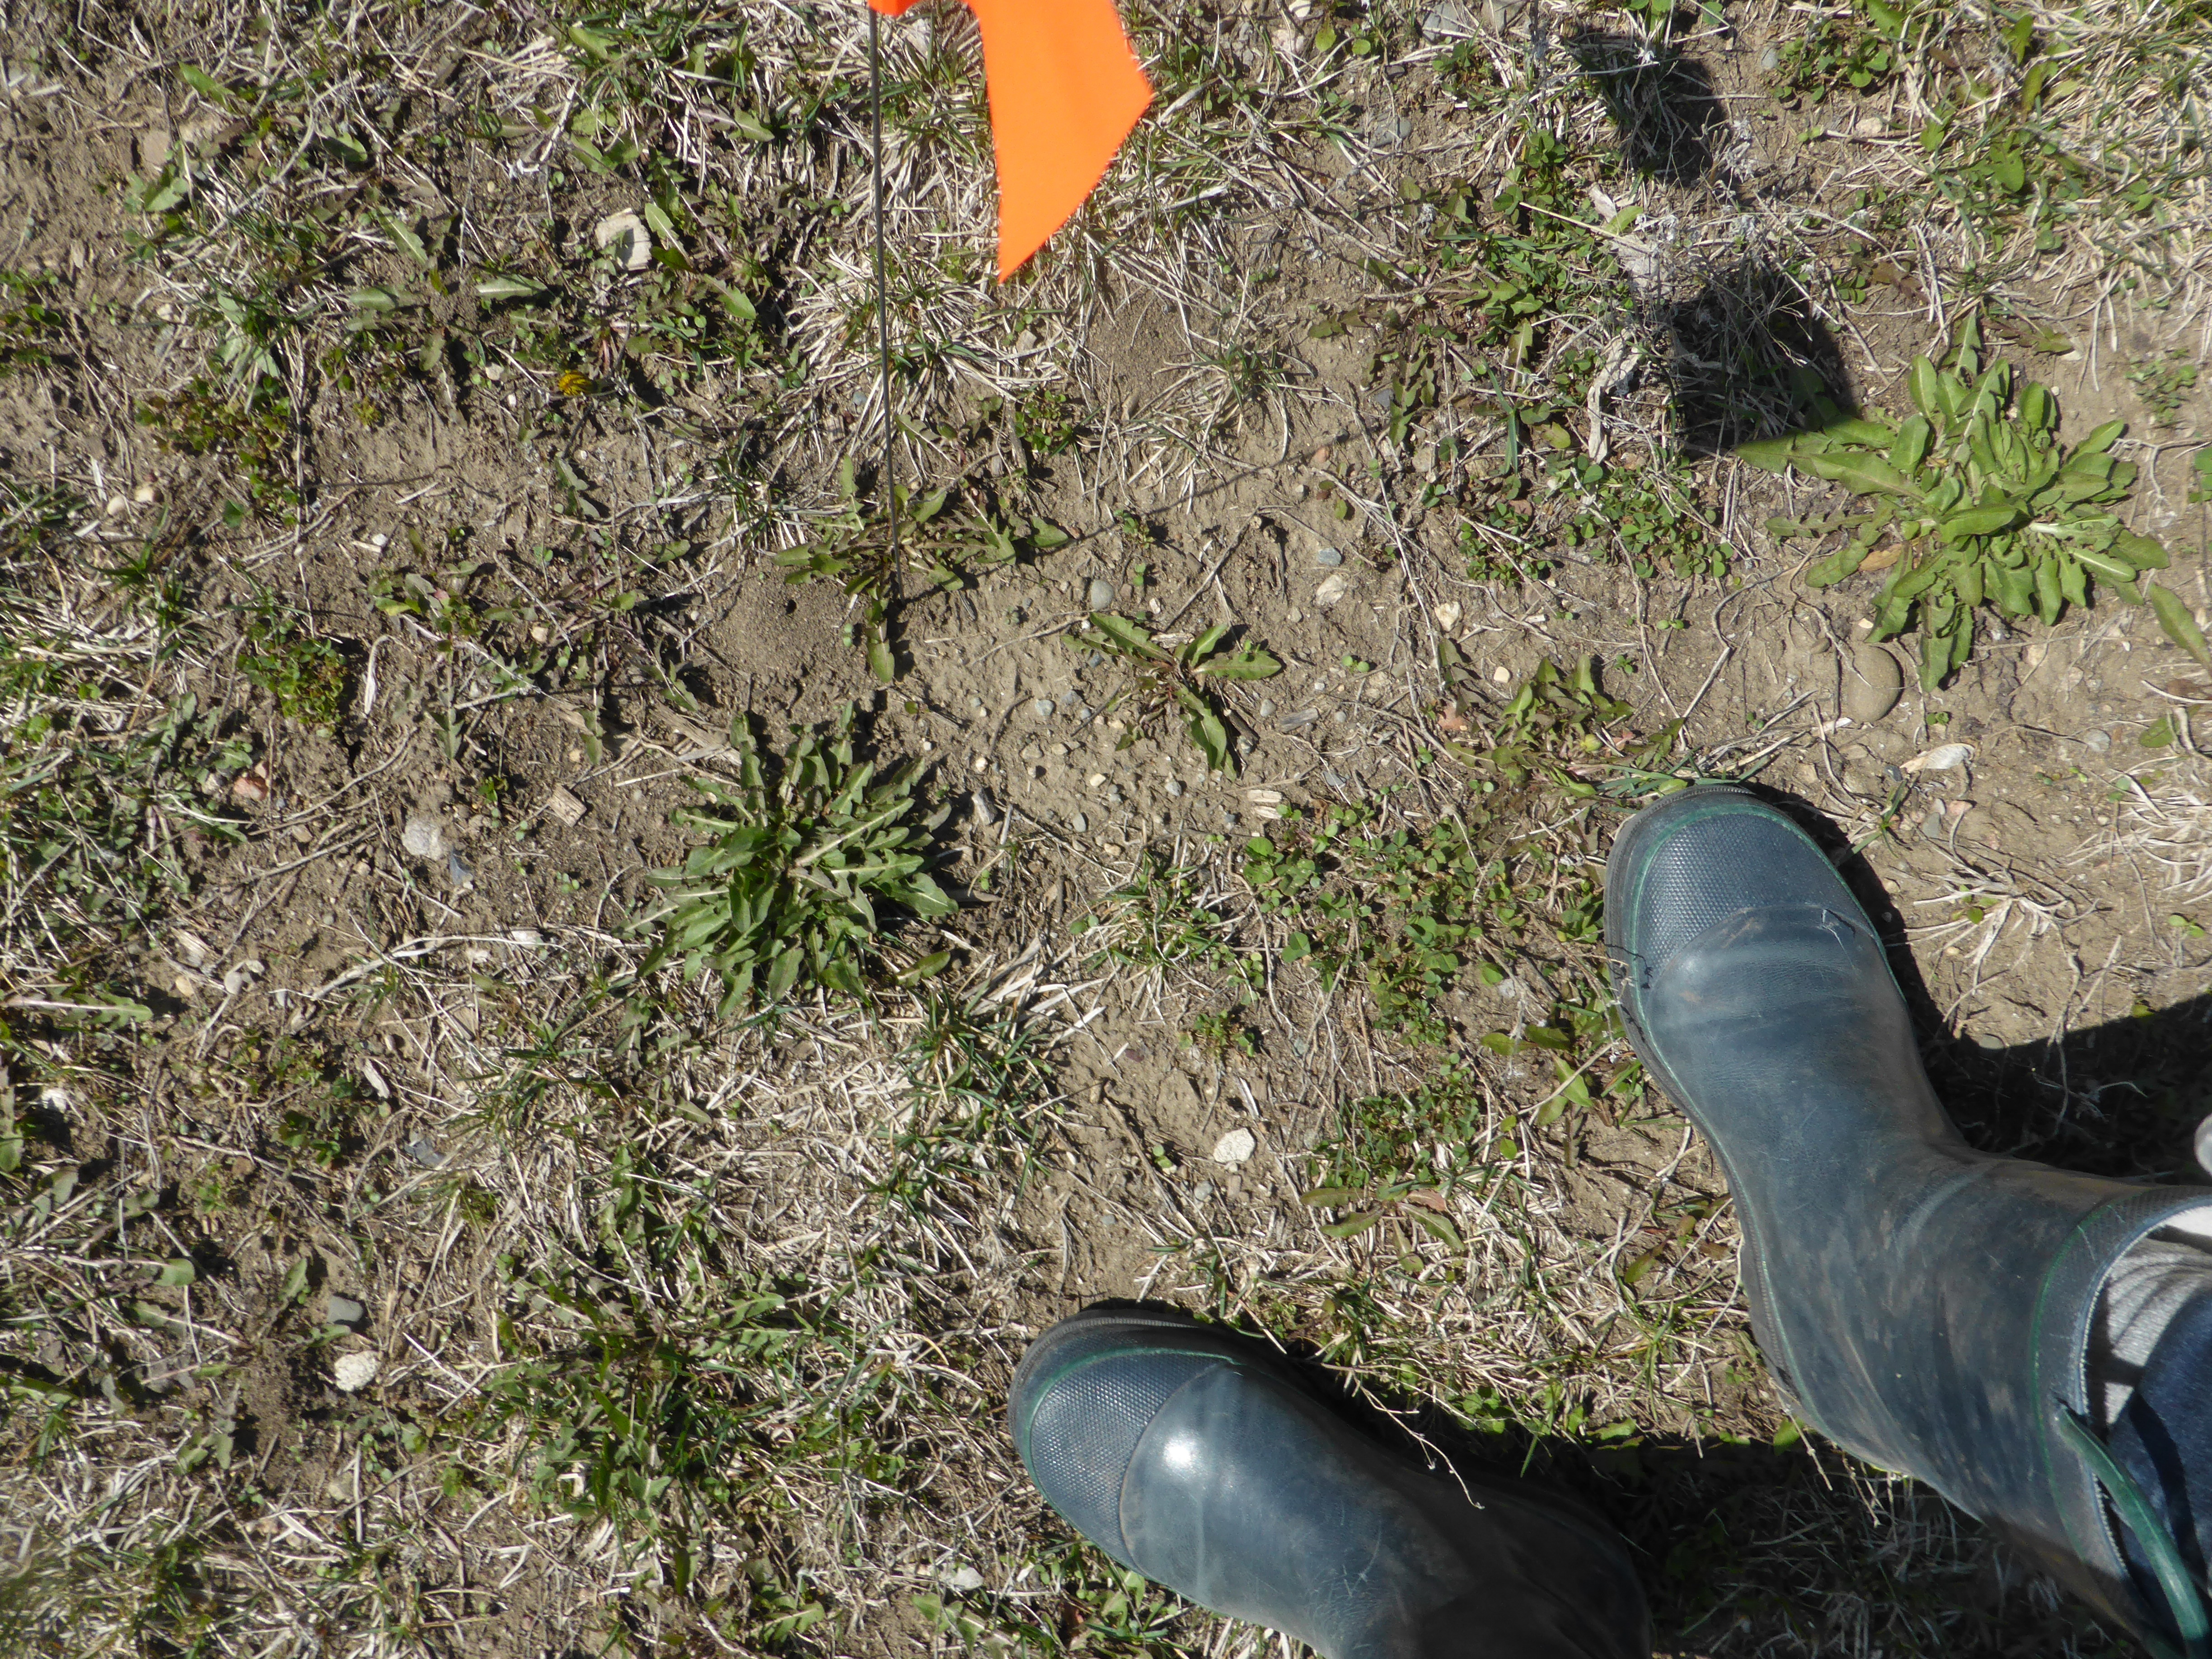 This photo was taken with the camera aiming towards the ground. In the lower right-hand corner of the frame are feet in calf-high rubber boots. In the upper portion of the frame, there are holes in the ground, among the short-cropped grass. Near the holes are small orange flags on small wire posts.